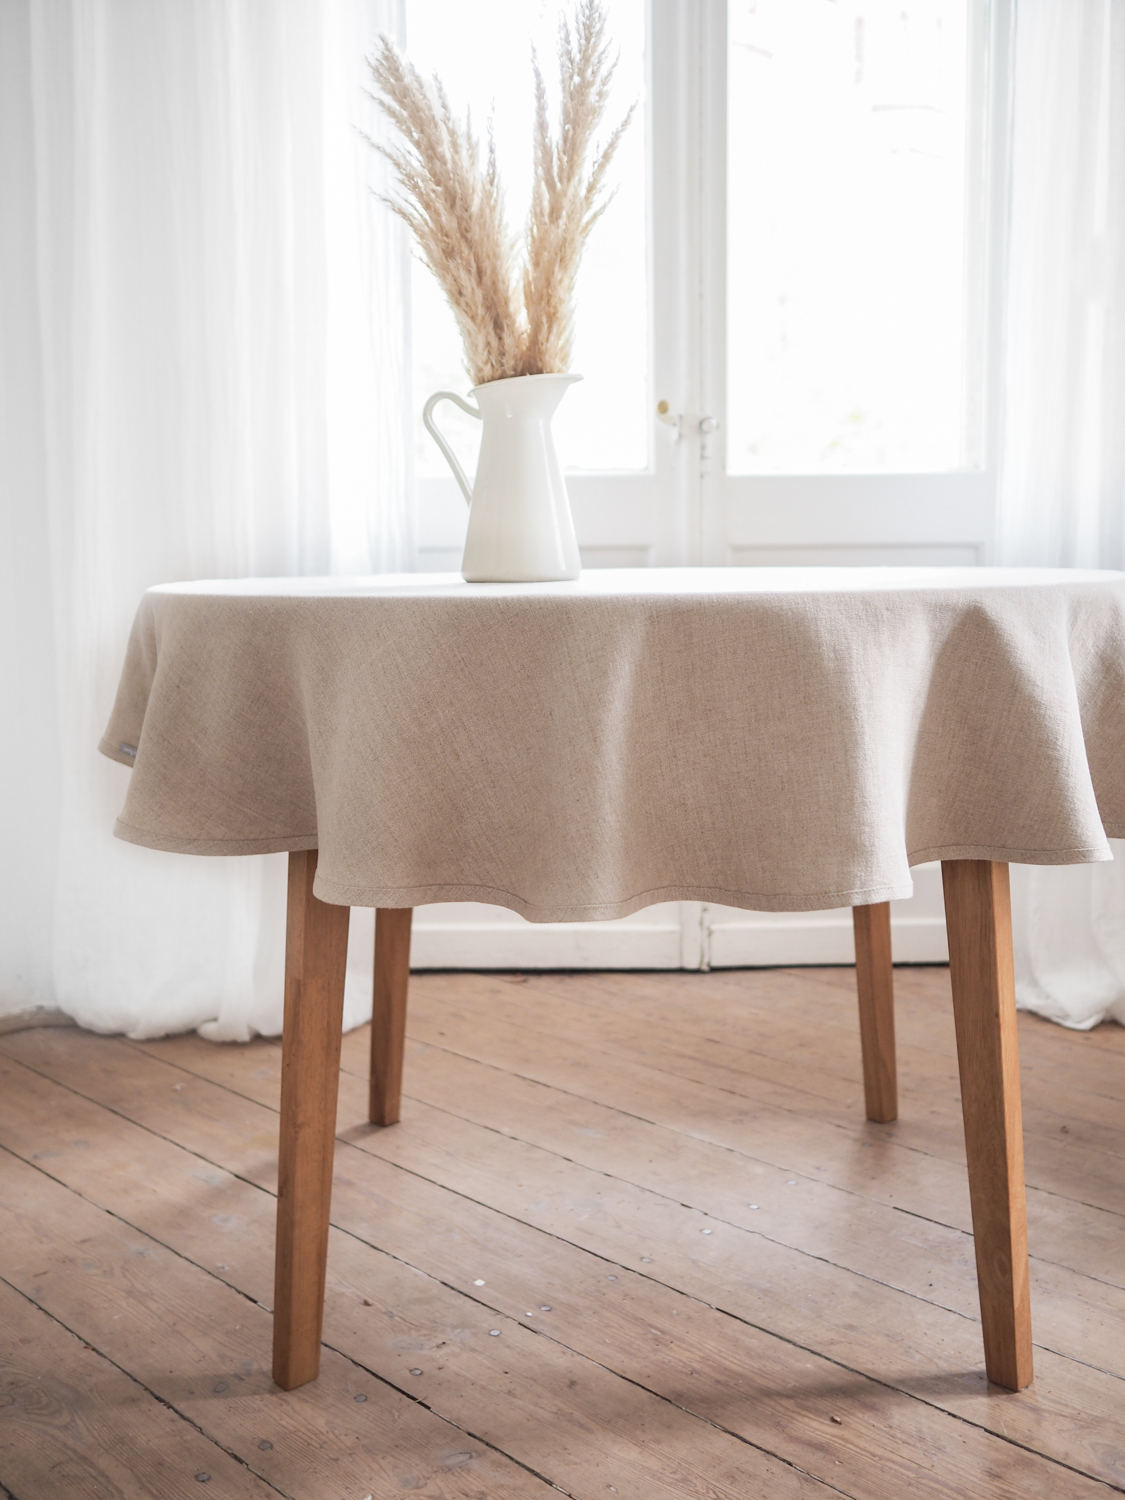 Round Linen Tablecloth Made Of Heavy